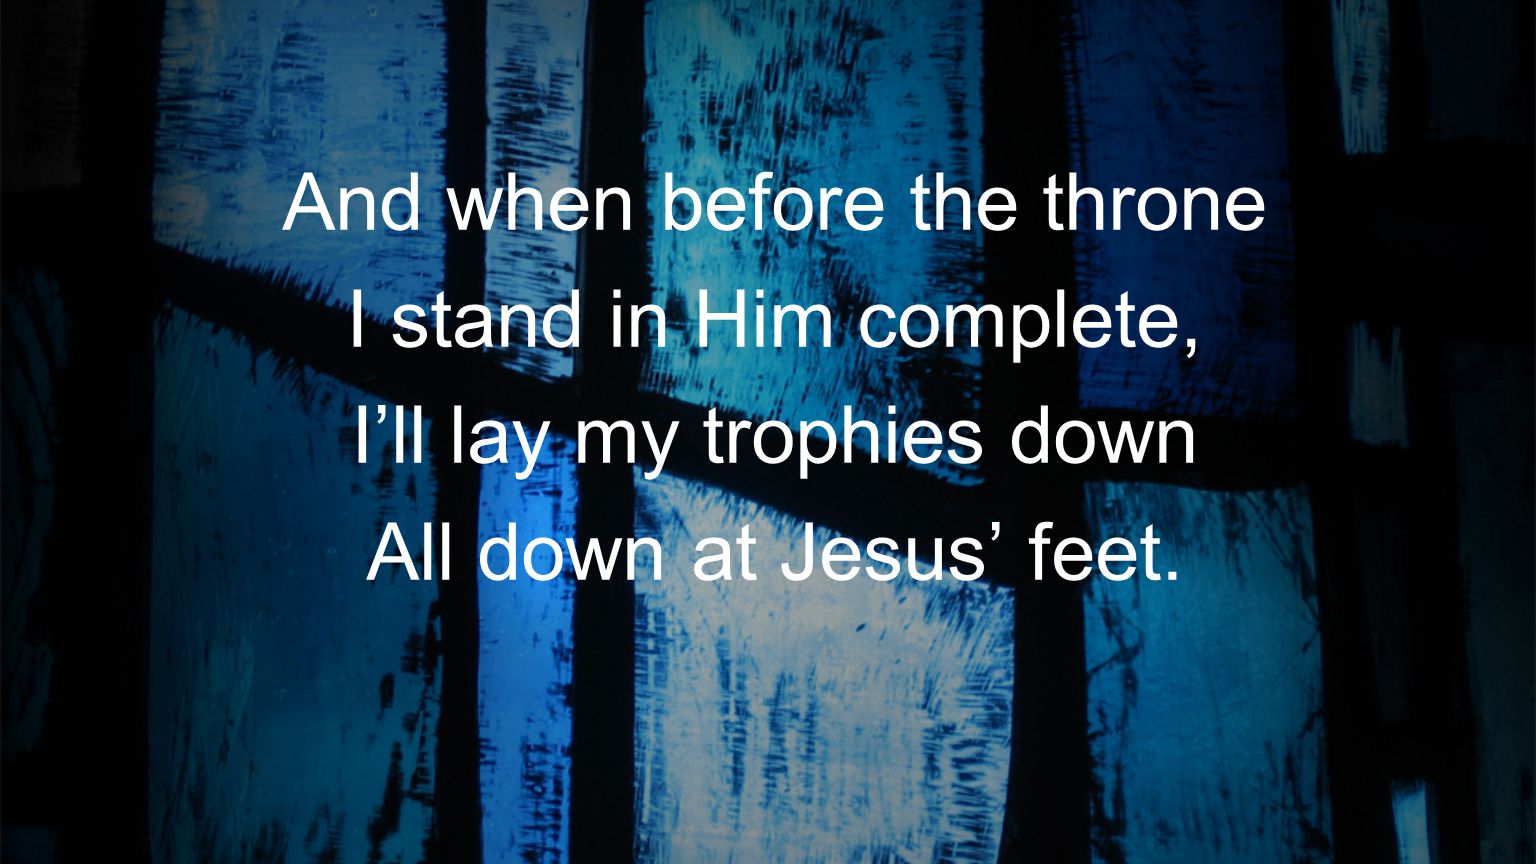 And when before the throne I stand in Him complete,